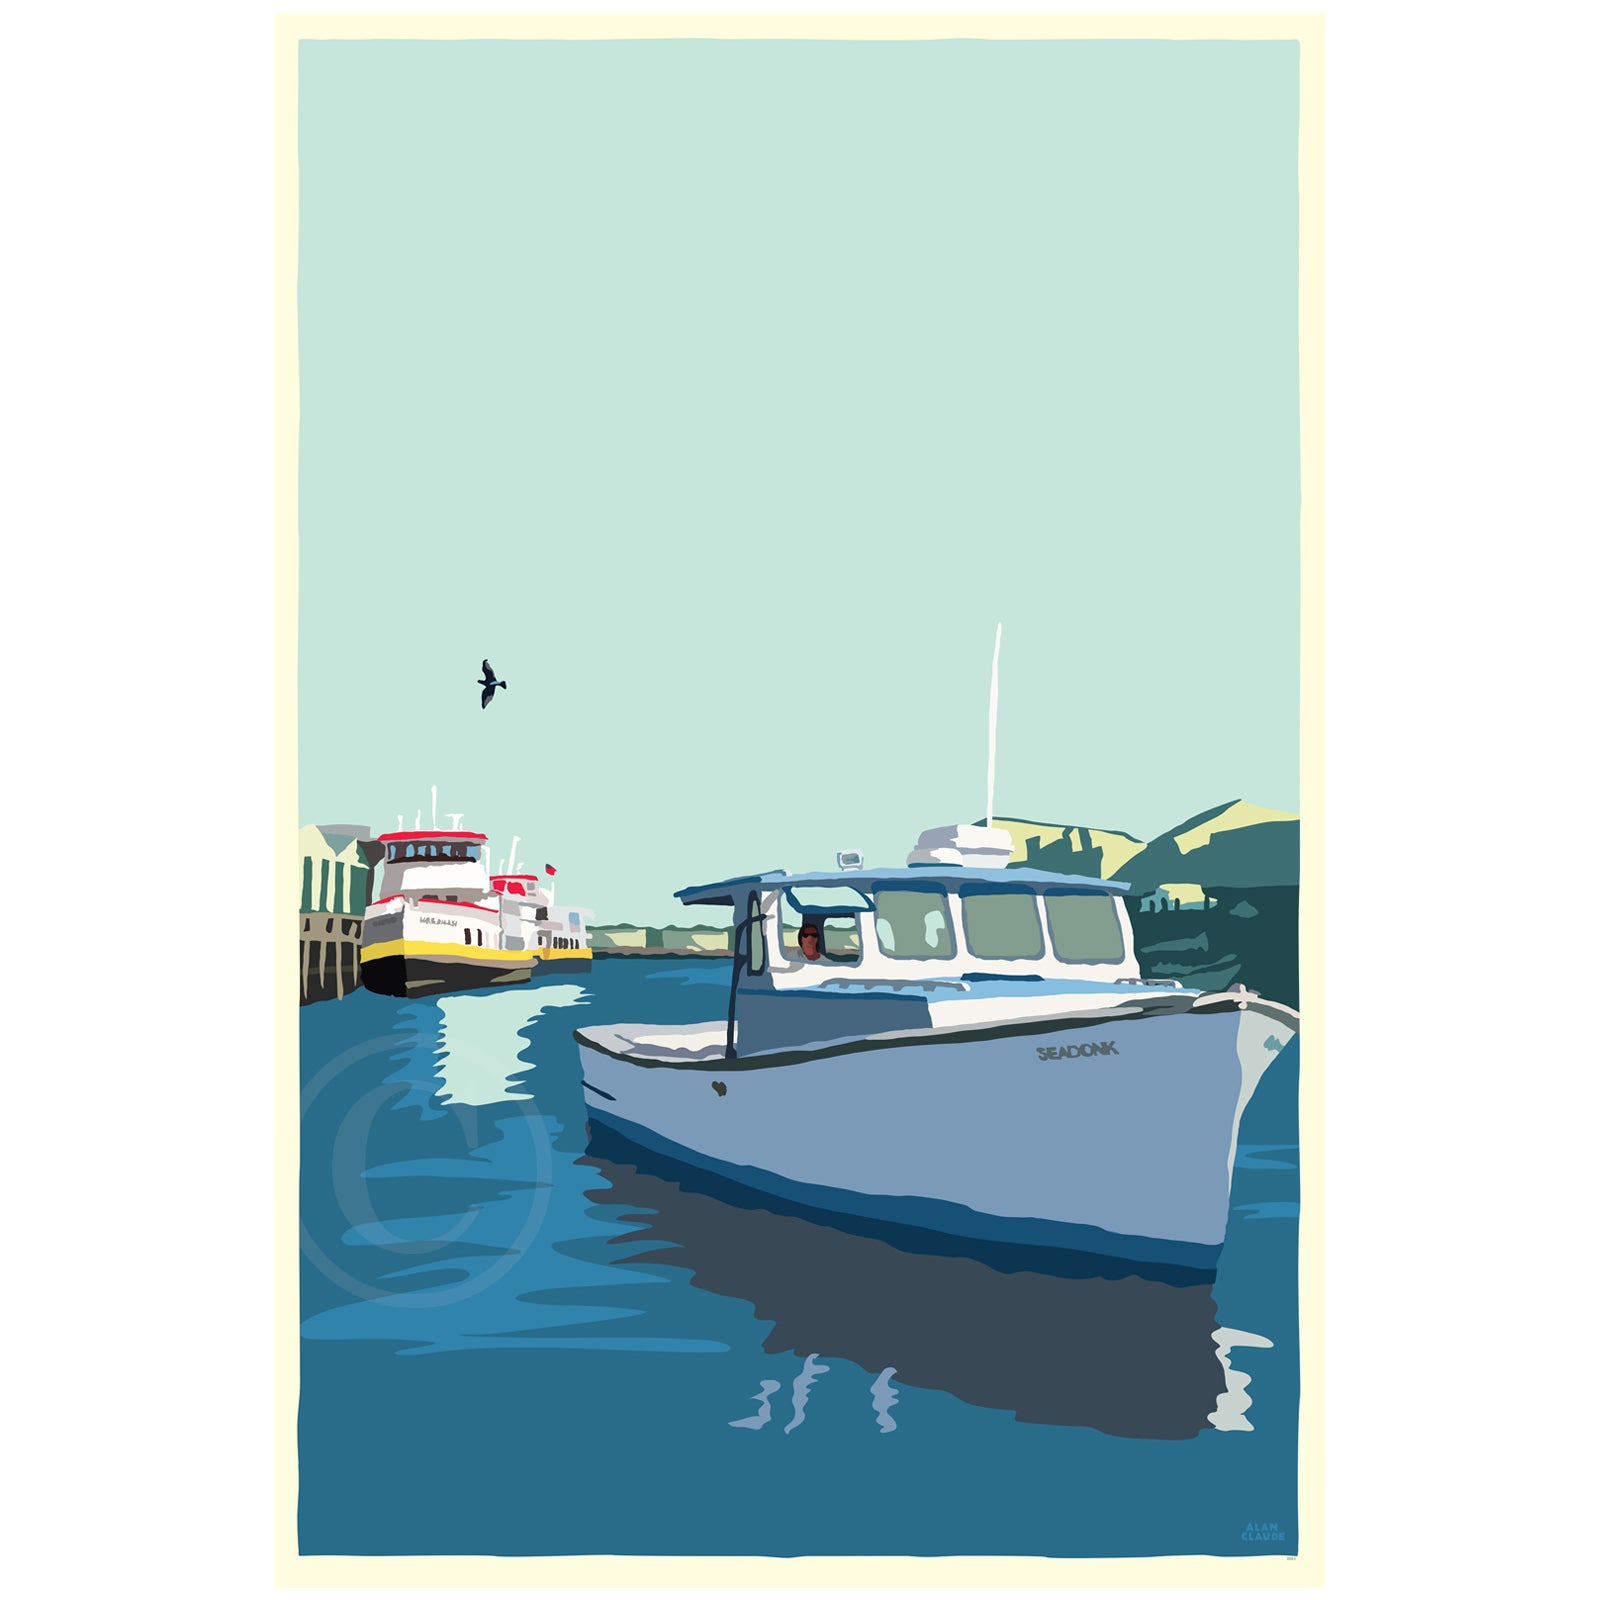 Coming Home Art Print 24" x 36" Wall Poster - Maine